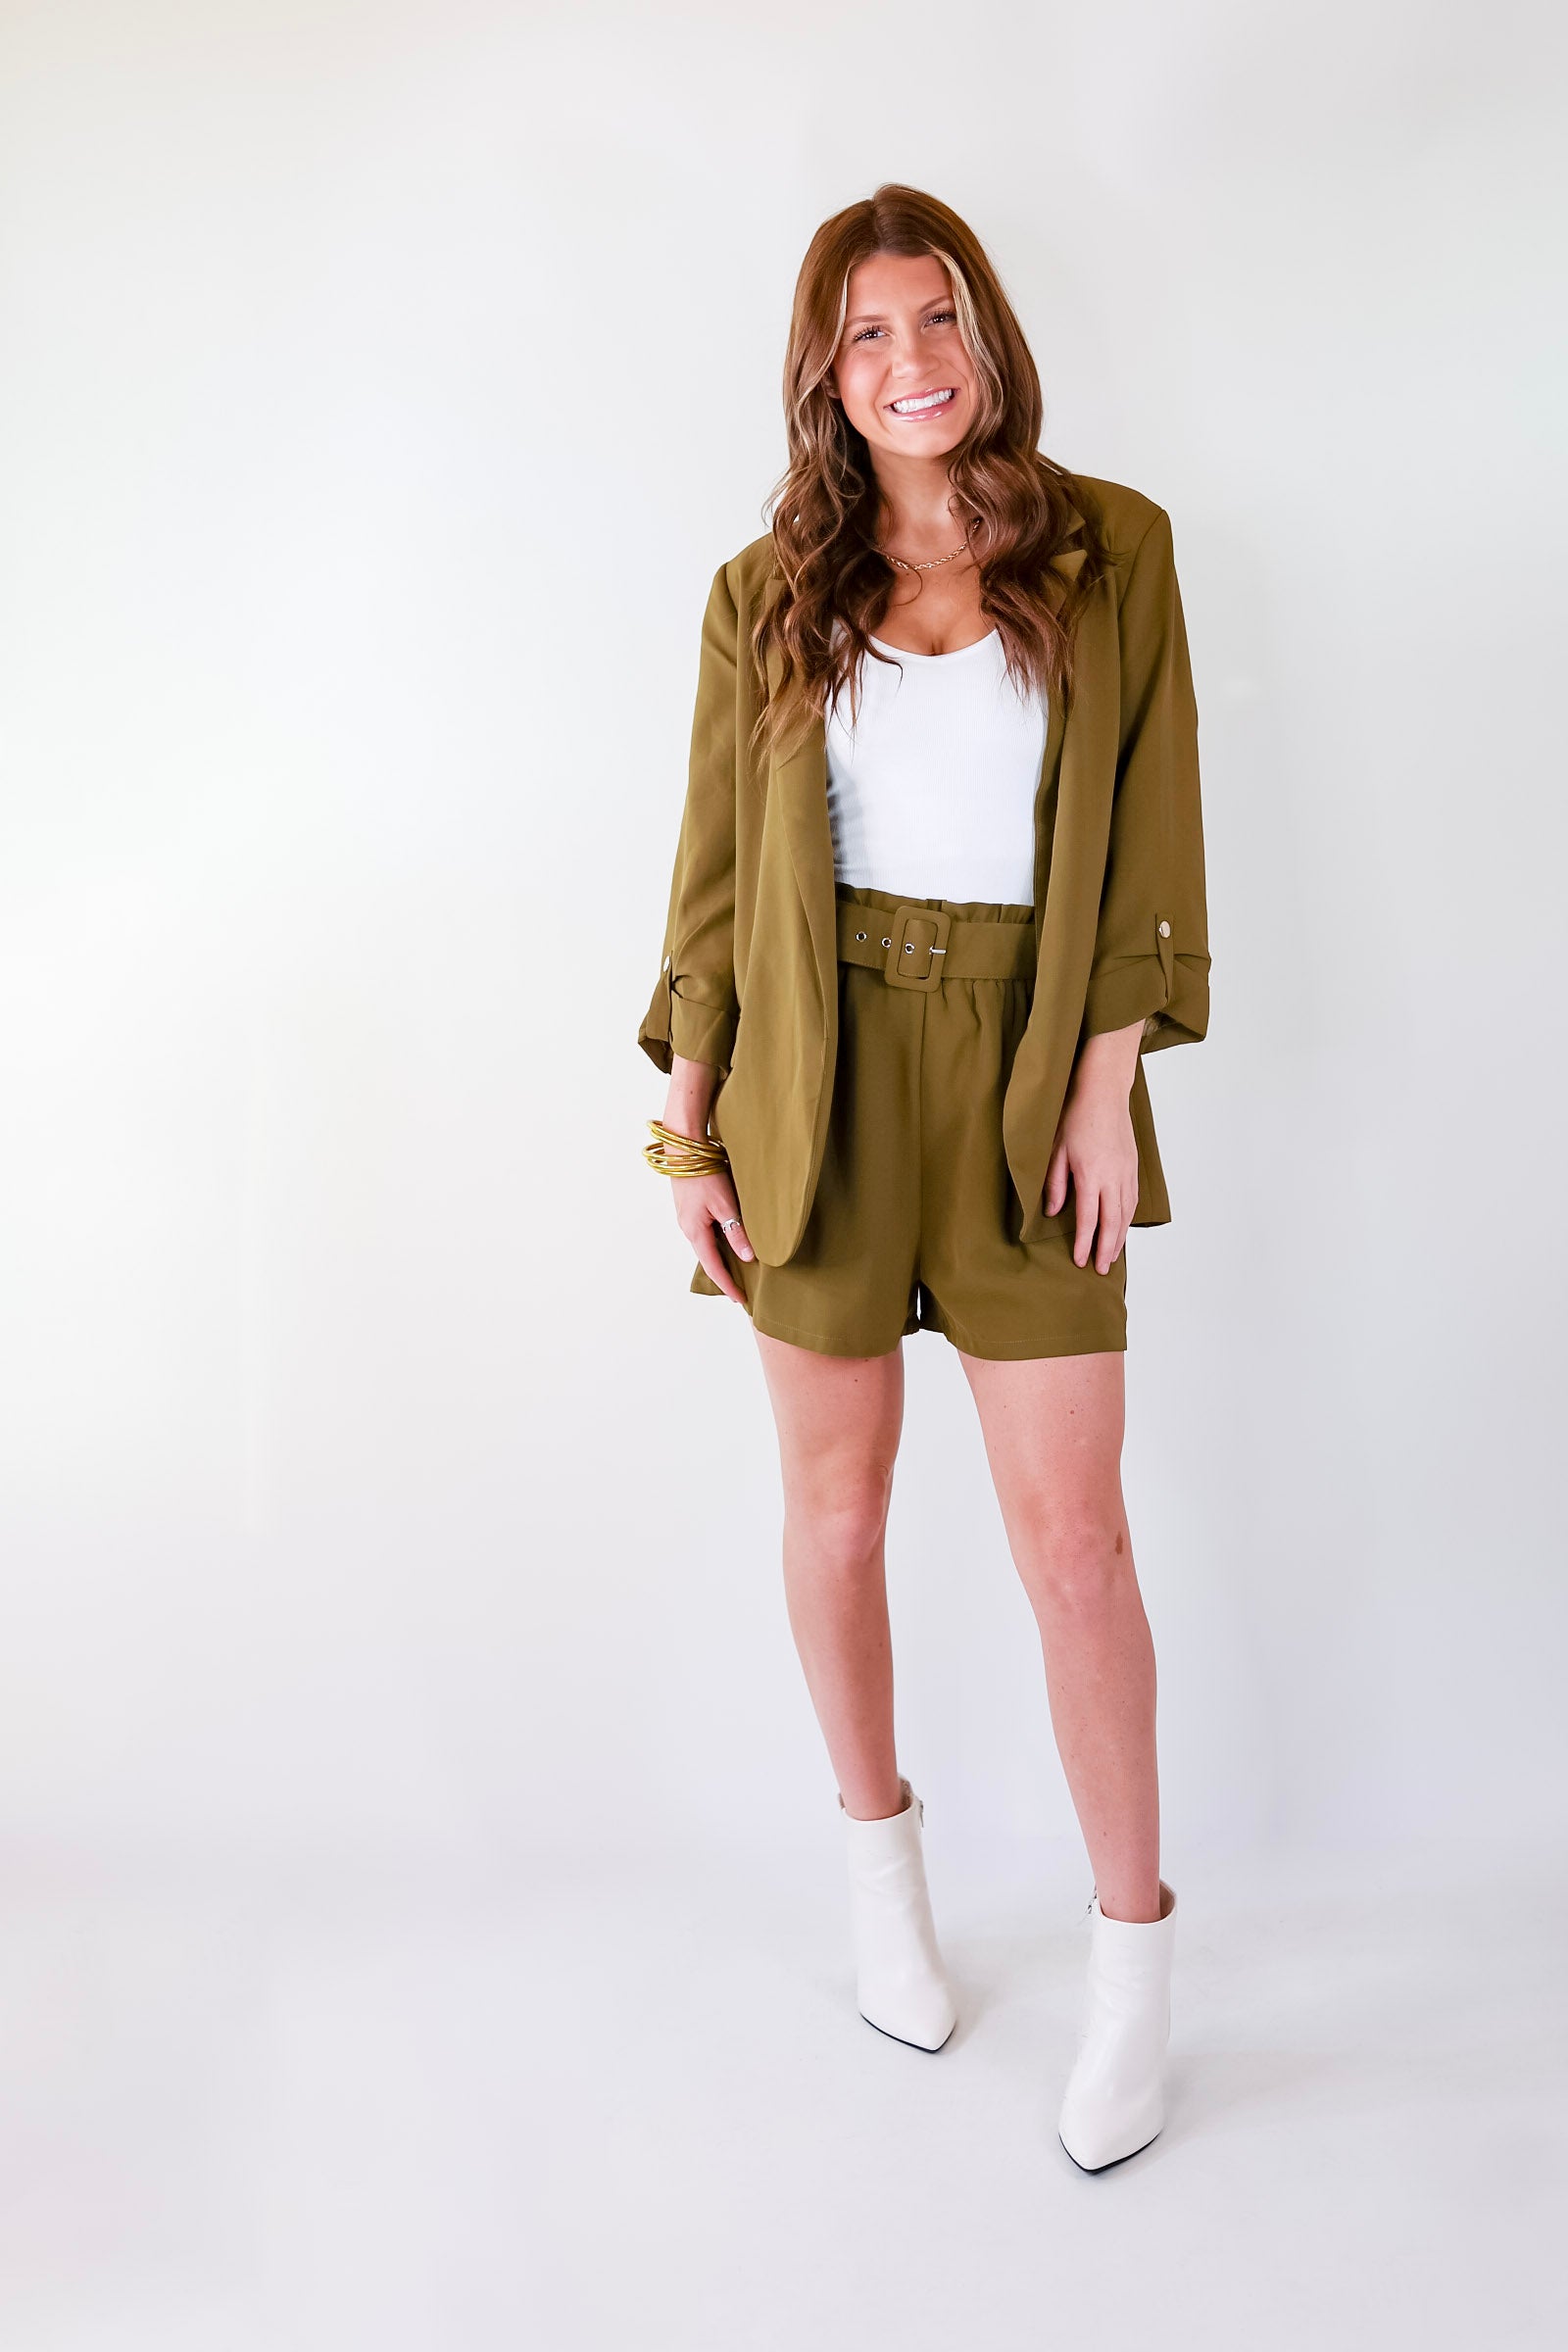 Take A Lap Mid Thigh Biker Shorts in Olive Green